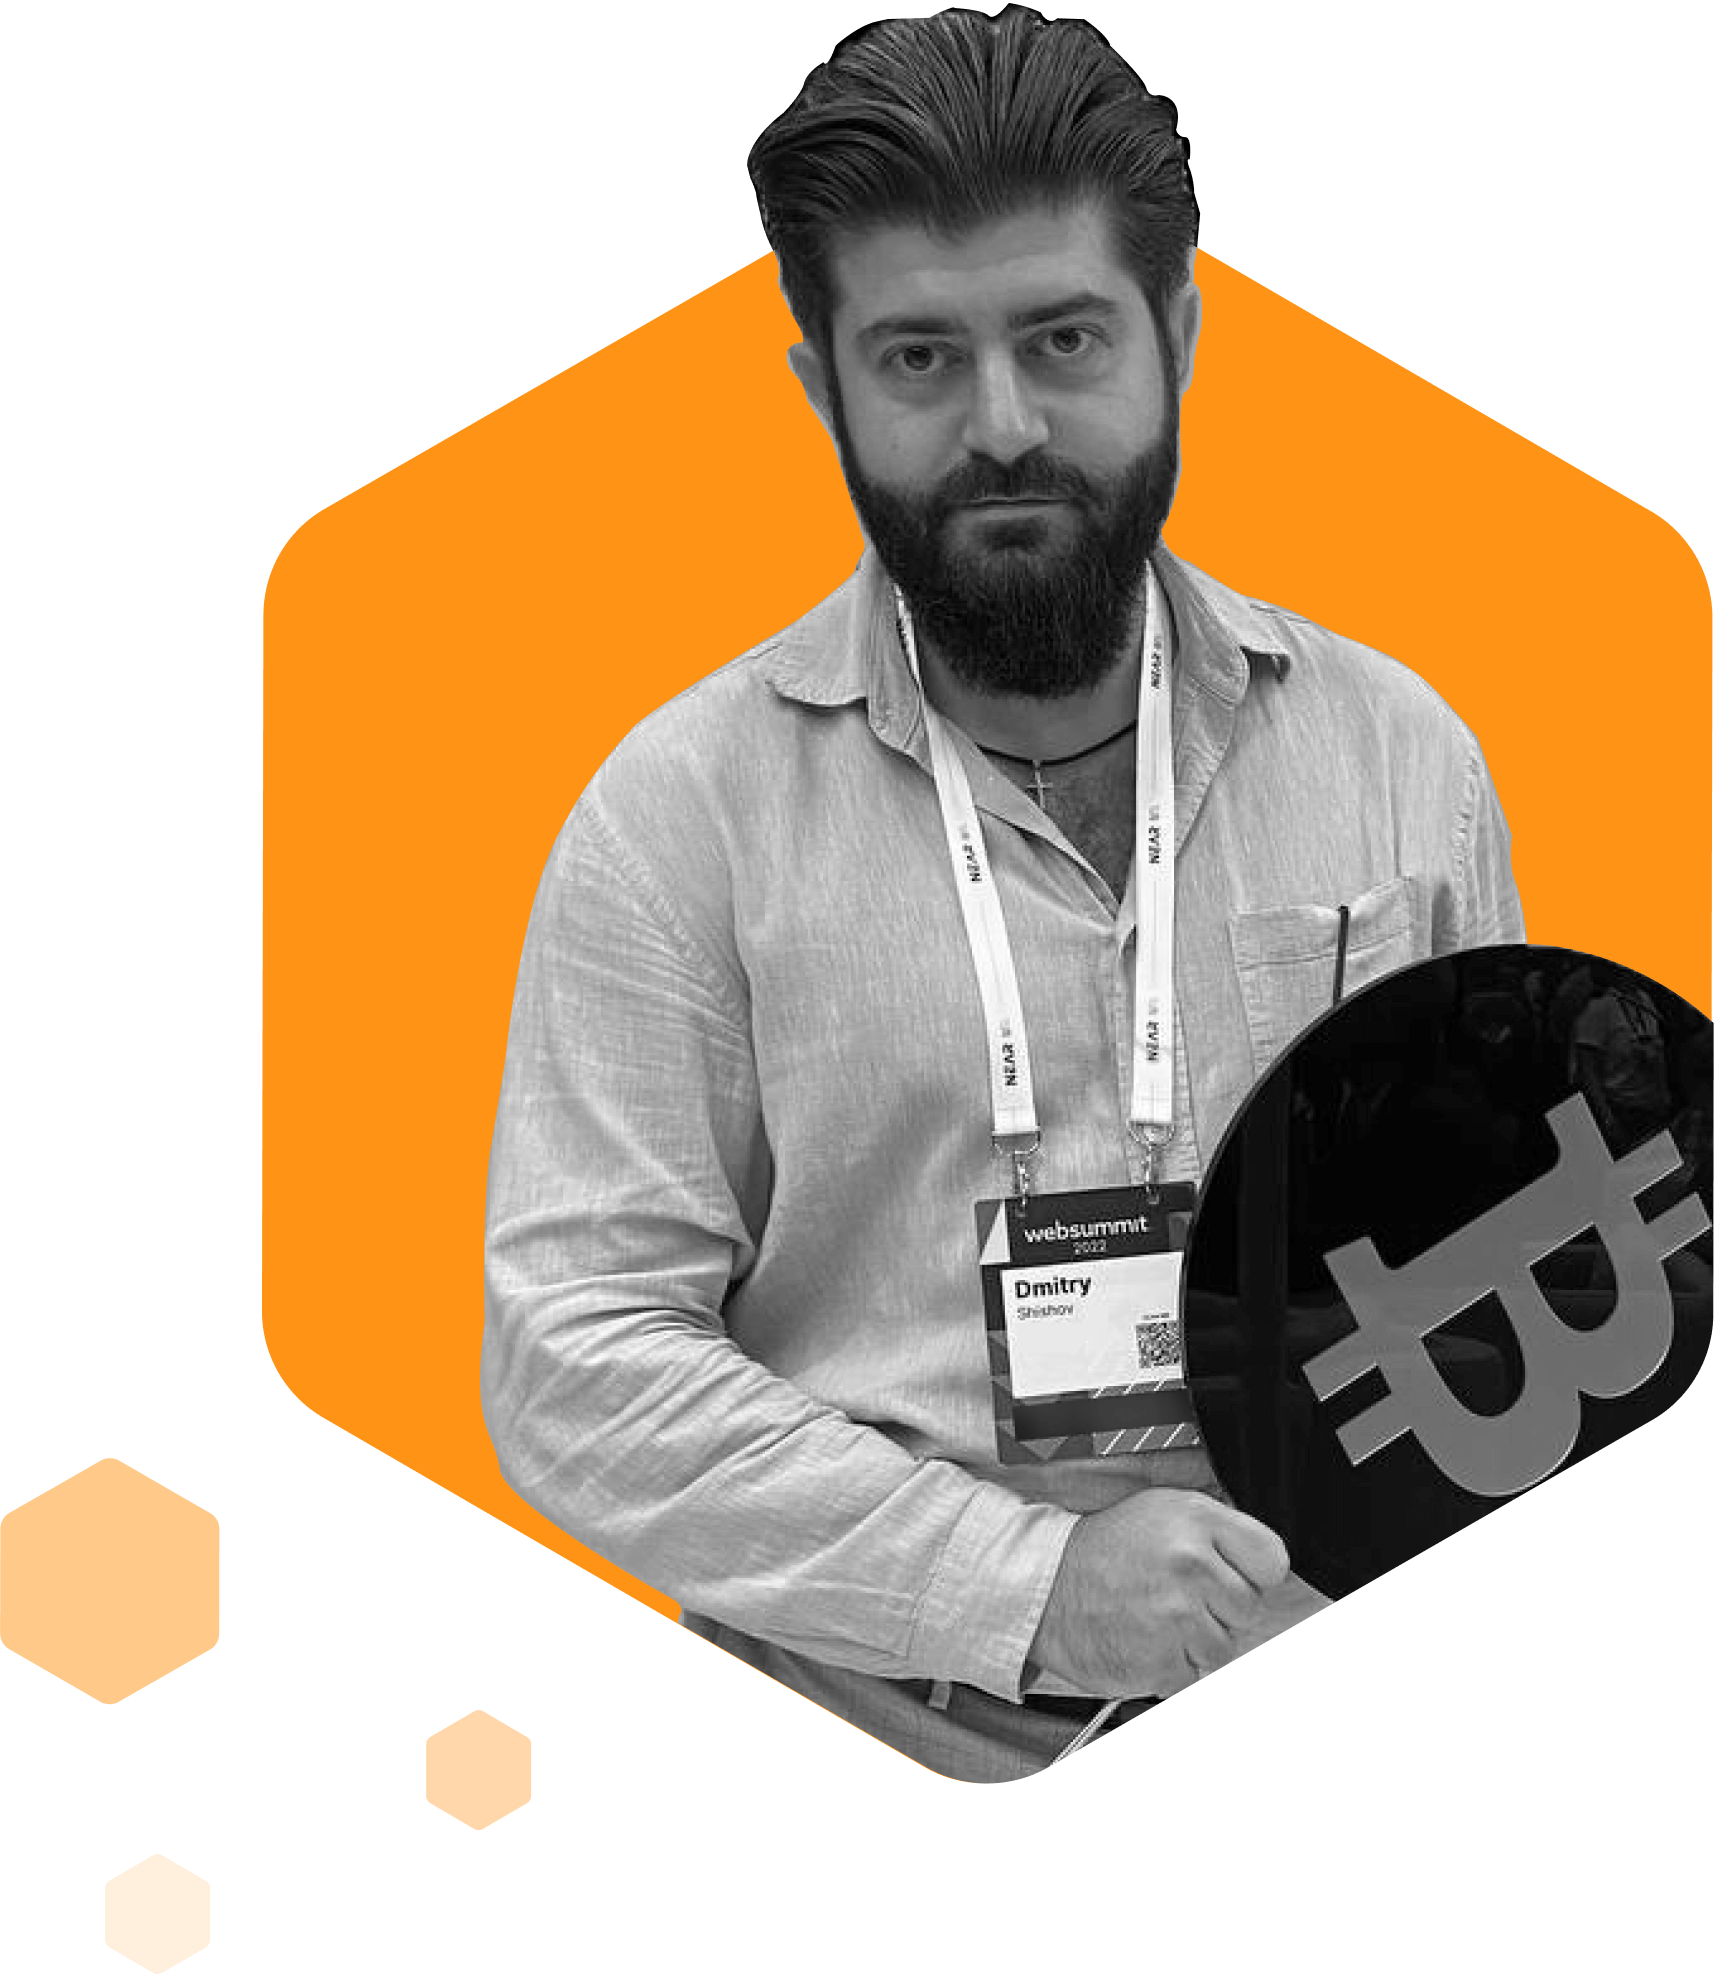 "At Bidsbee, we are working to make crypto trading accessible to all who have always wanted to try but couldn’t because they were lacking experience and knowledge. Here, newbies are welcomed to experience the new fascinating world and earn, and for professionals, we’ve created the most extensive advanced functionalities and tools and limitless ways to grow their wealth."